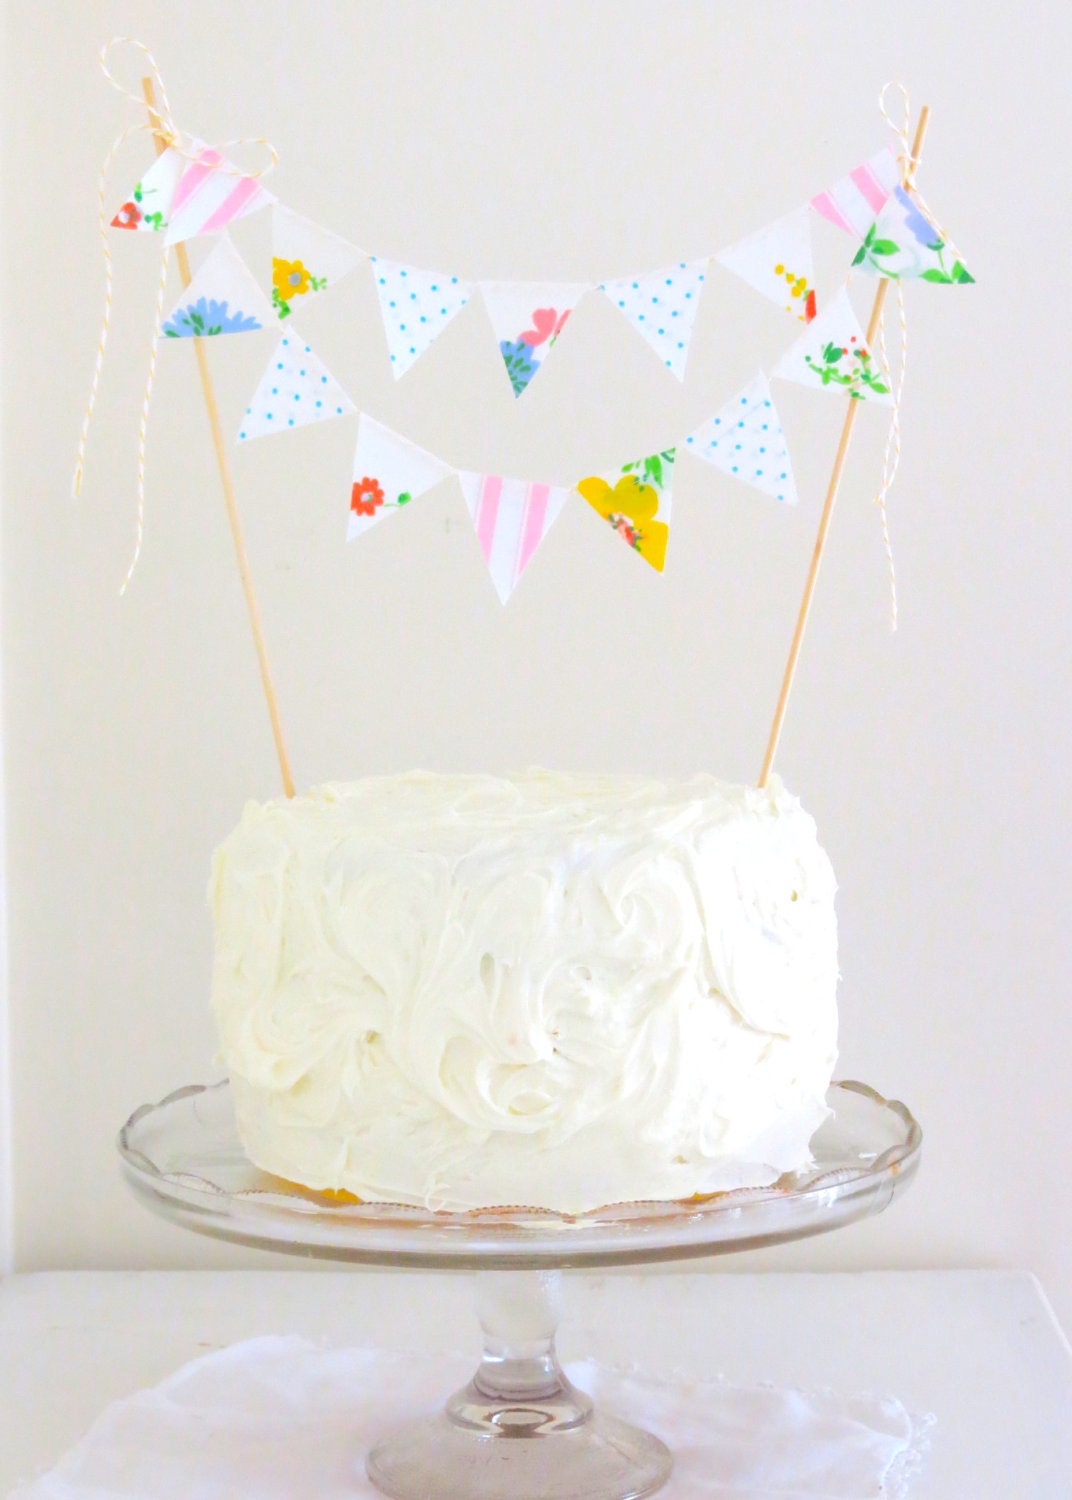 Cake Bunting- "Hello Dolly"